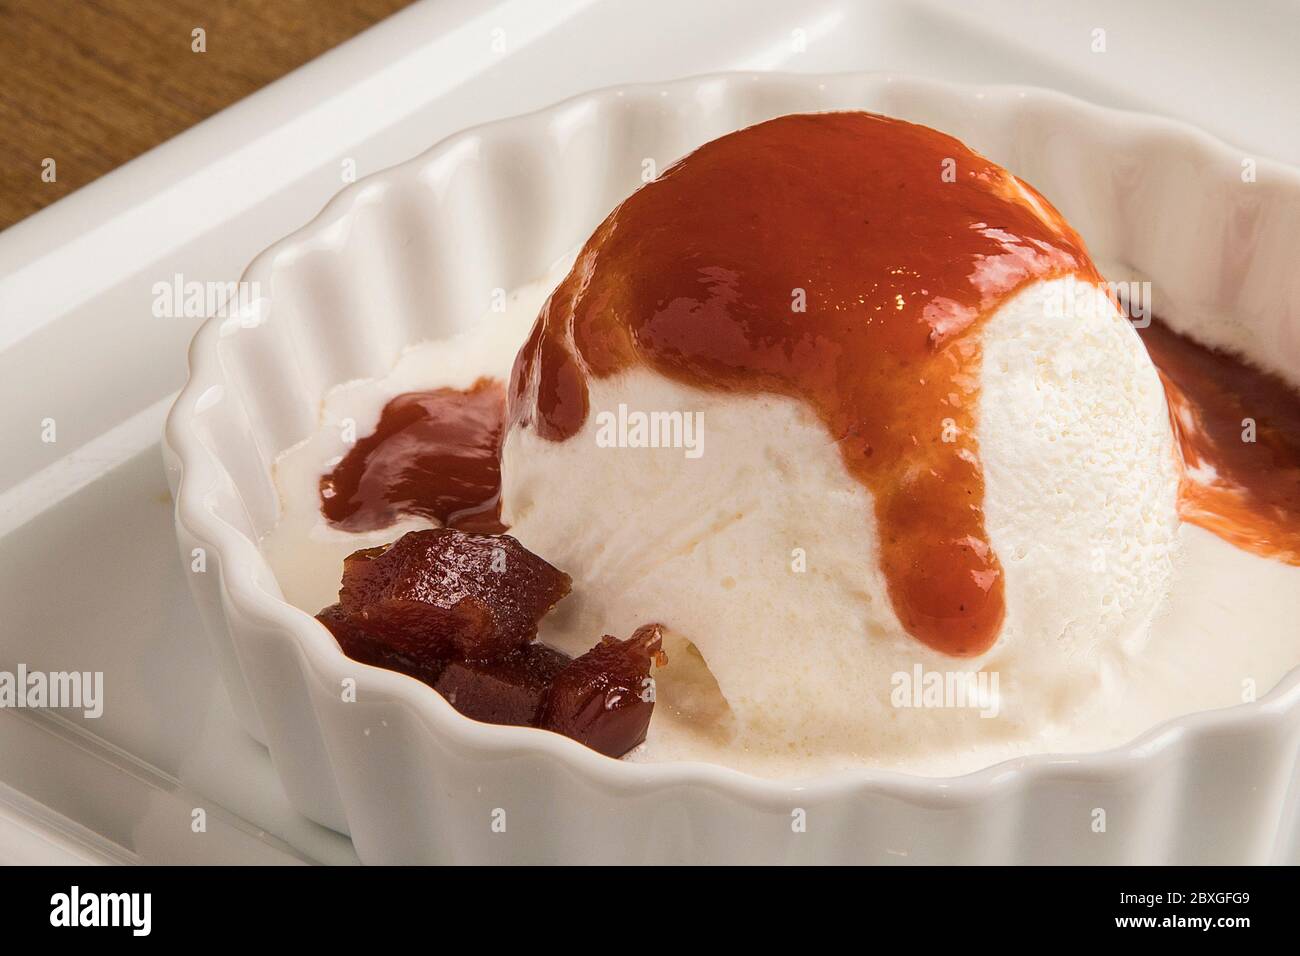 Ice-cream with guava syrup Stock Photo